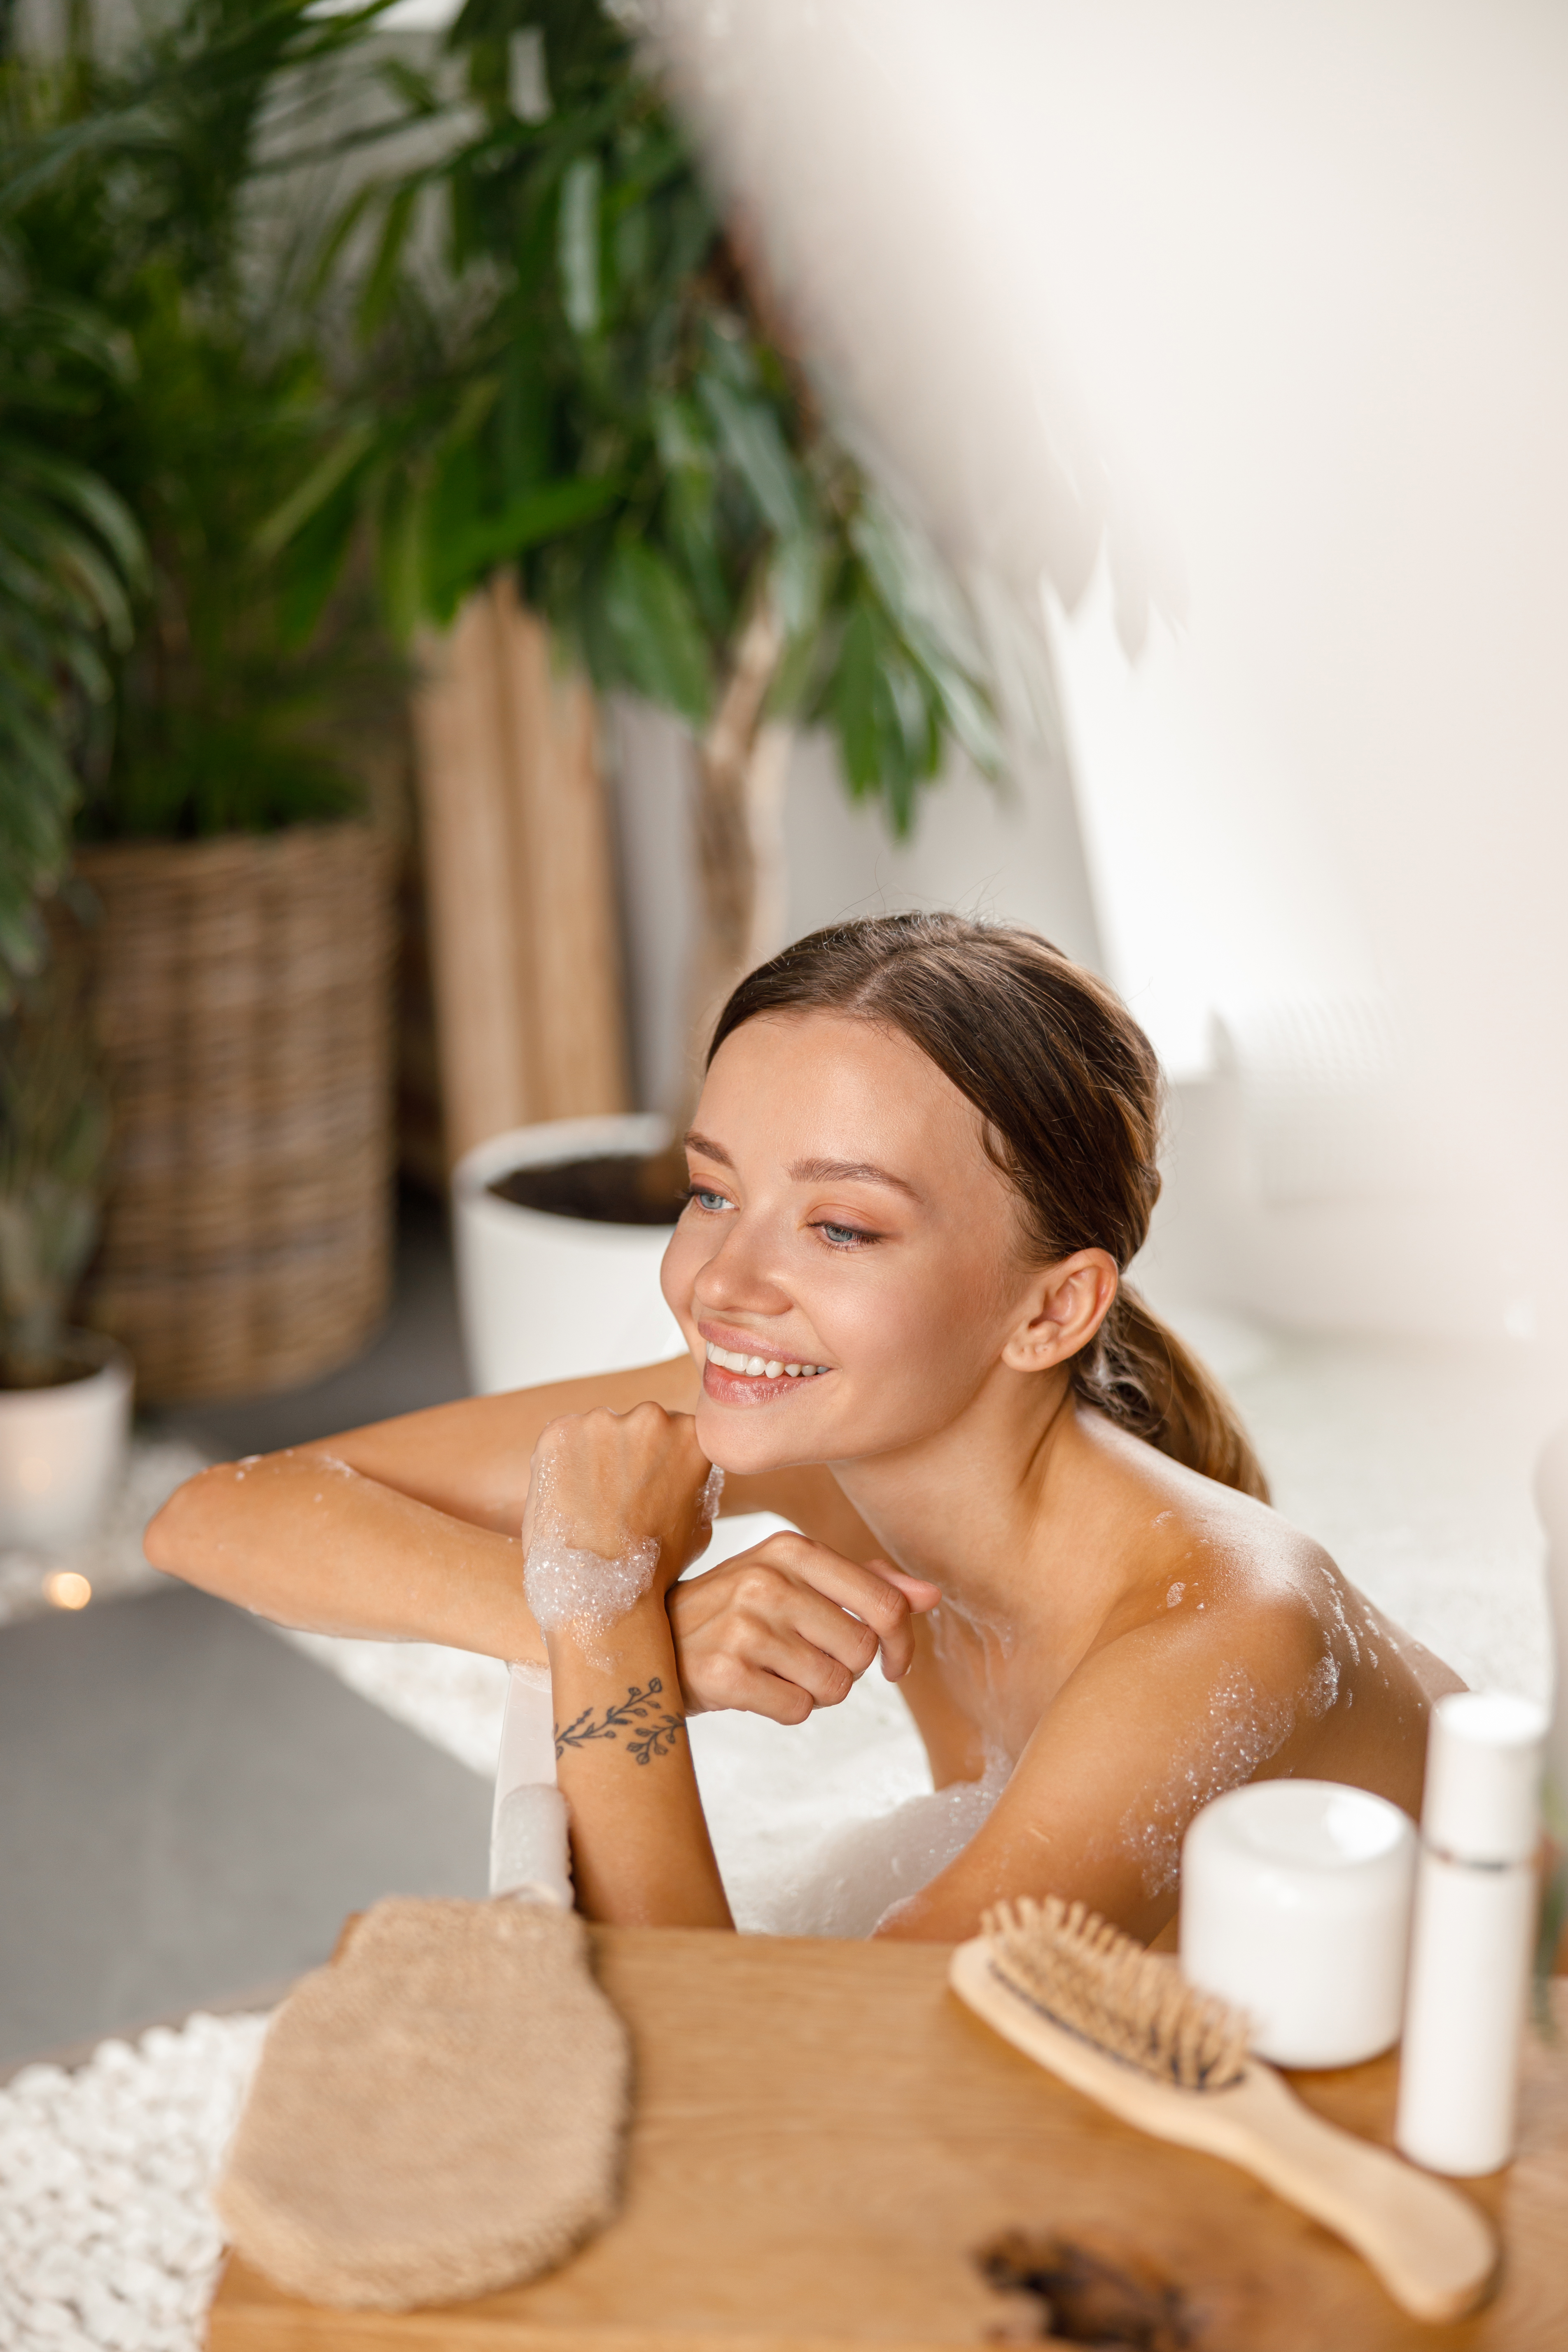 Joyful young woman smiling away and leaning on bathtub side while bathing at spa resort